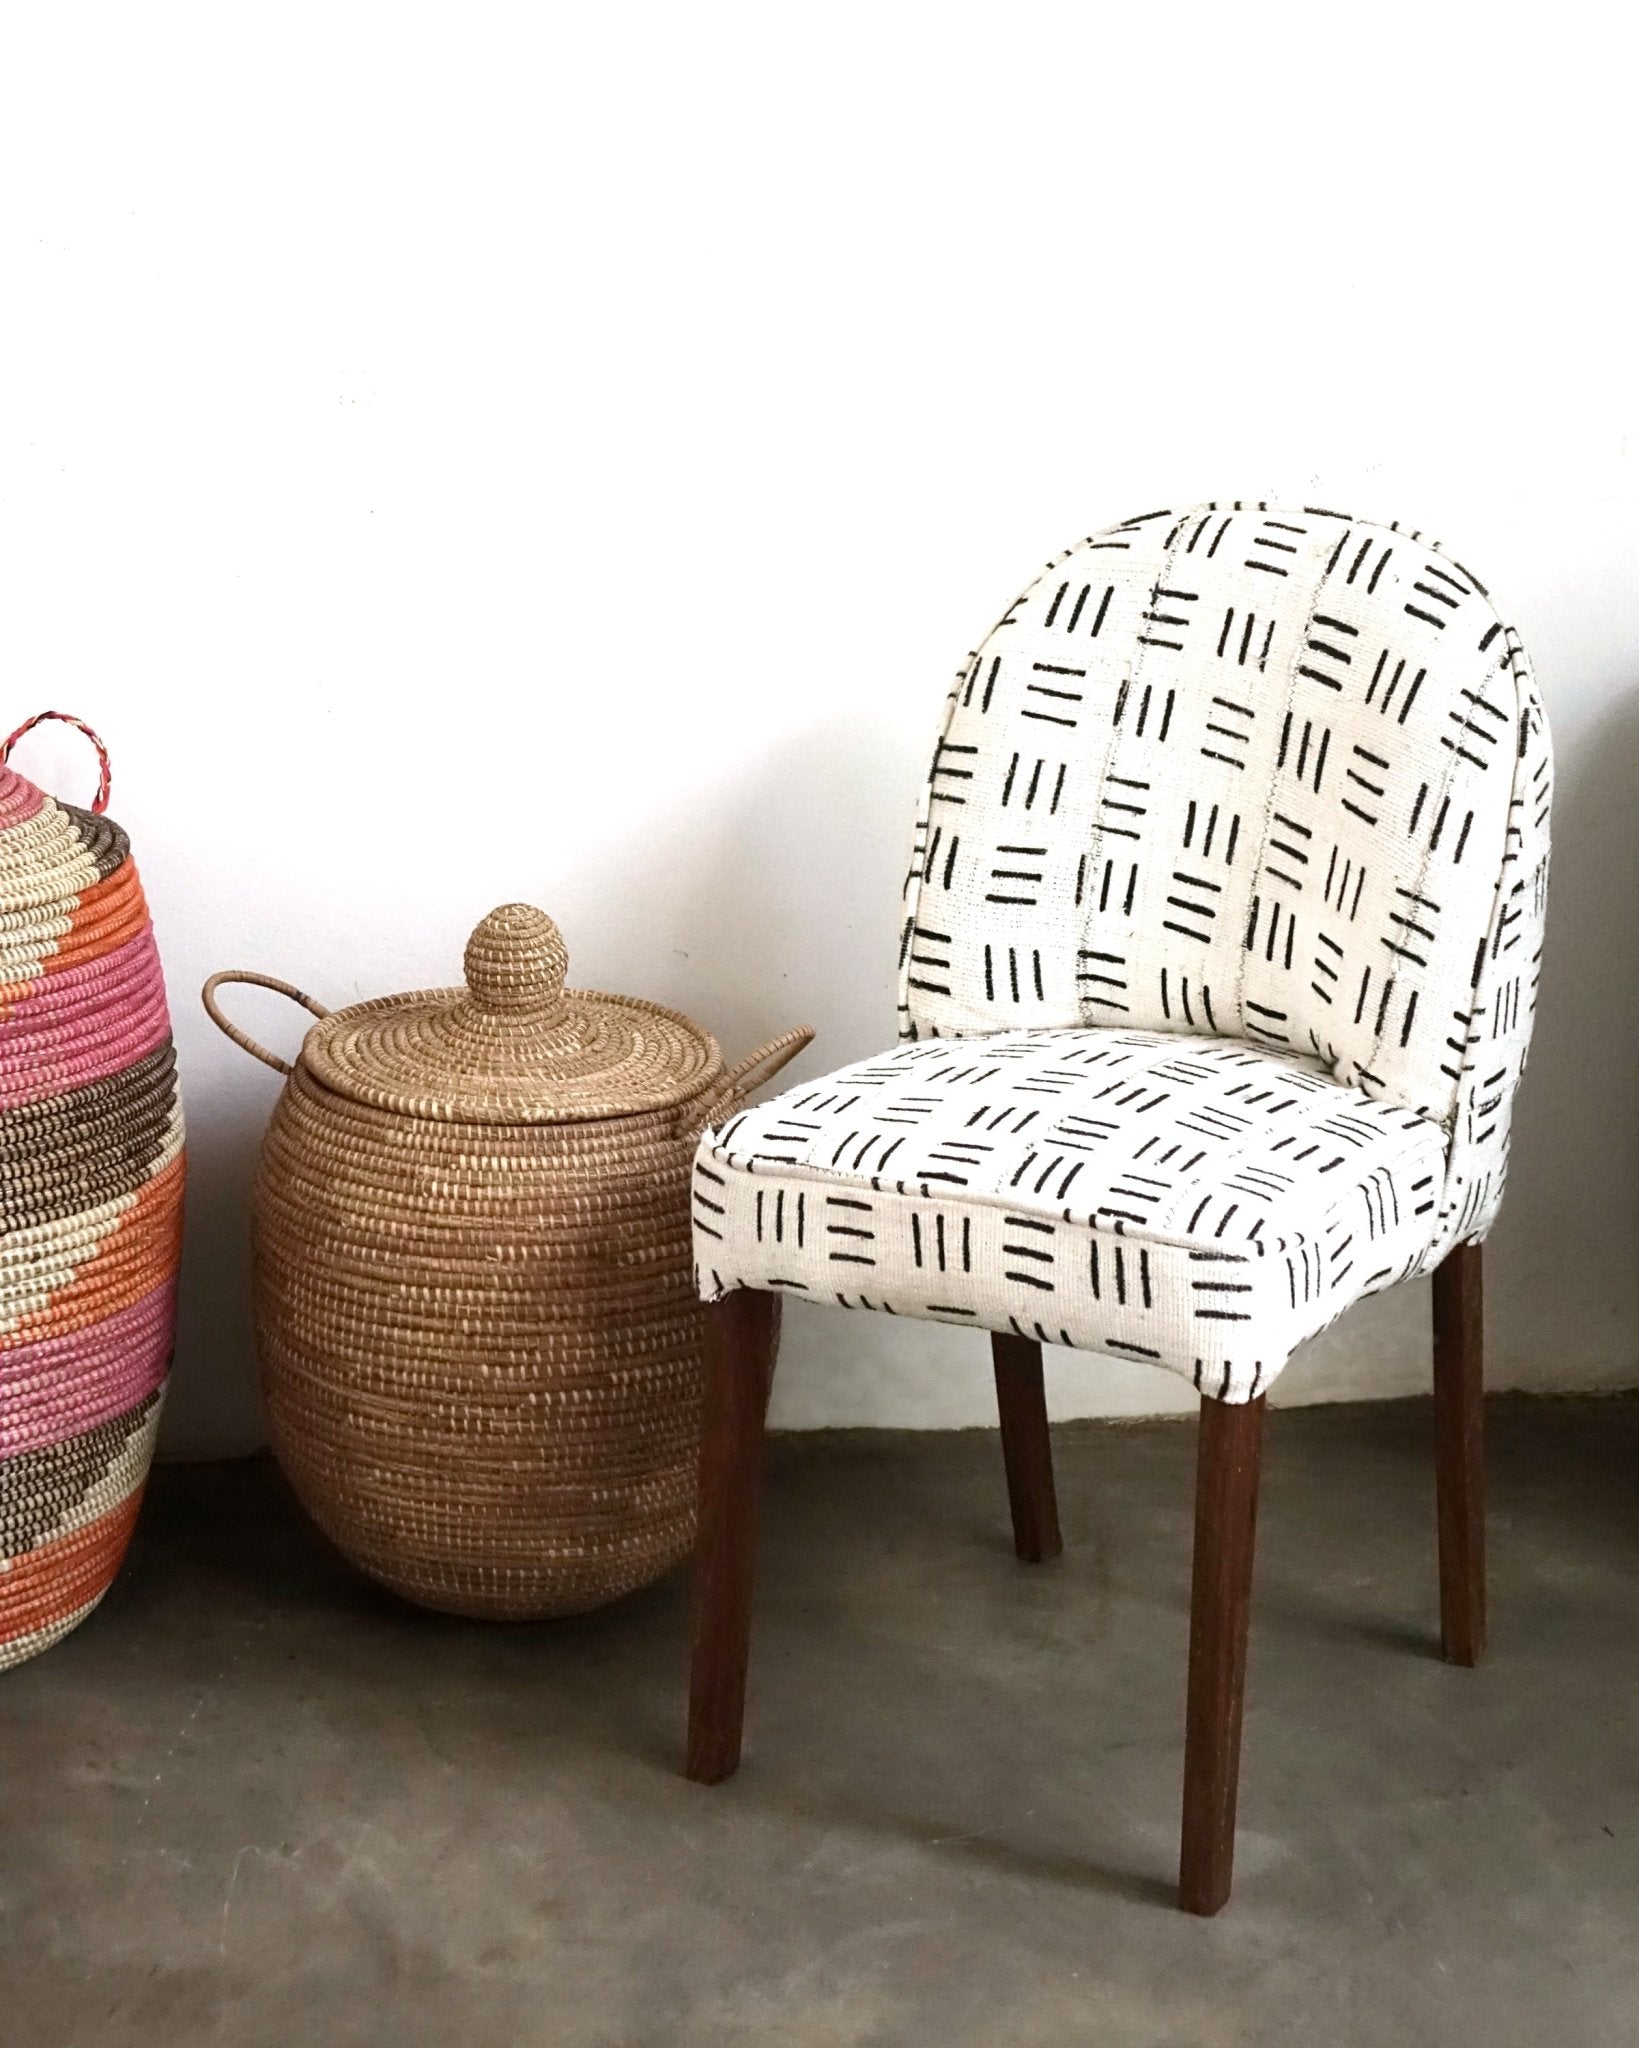 White Mud Cloth Upholstered Chair // Dining Chair // Wooden Chair Upholstered with Bogolon - modecorarts